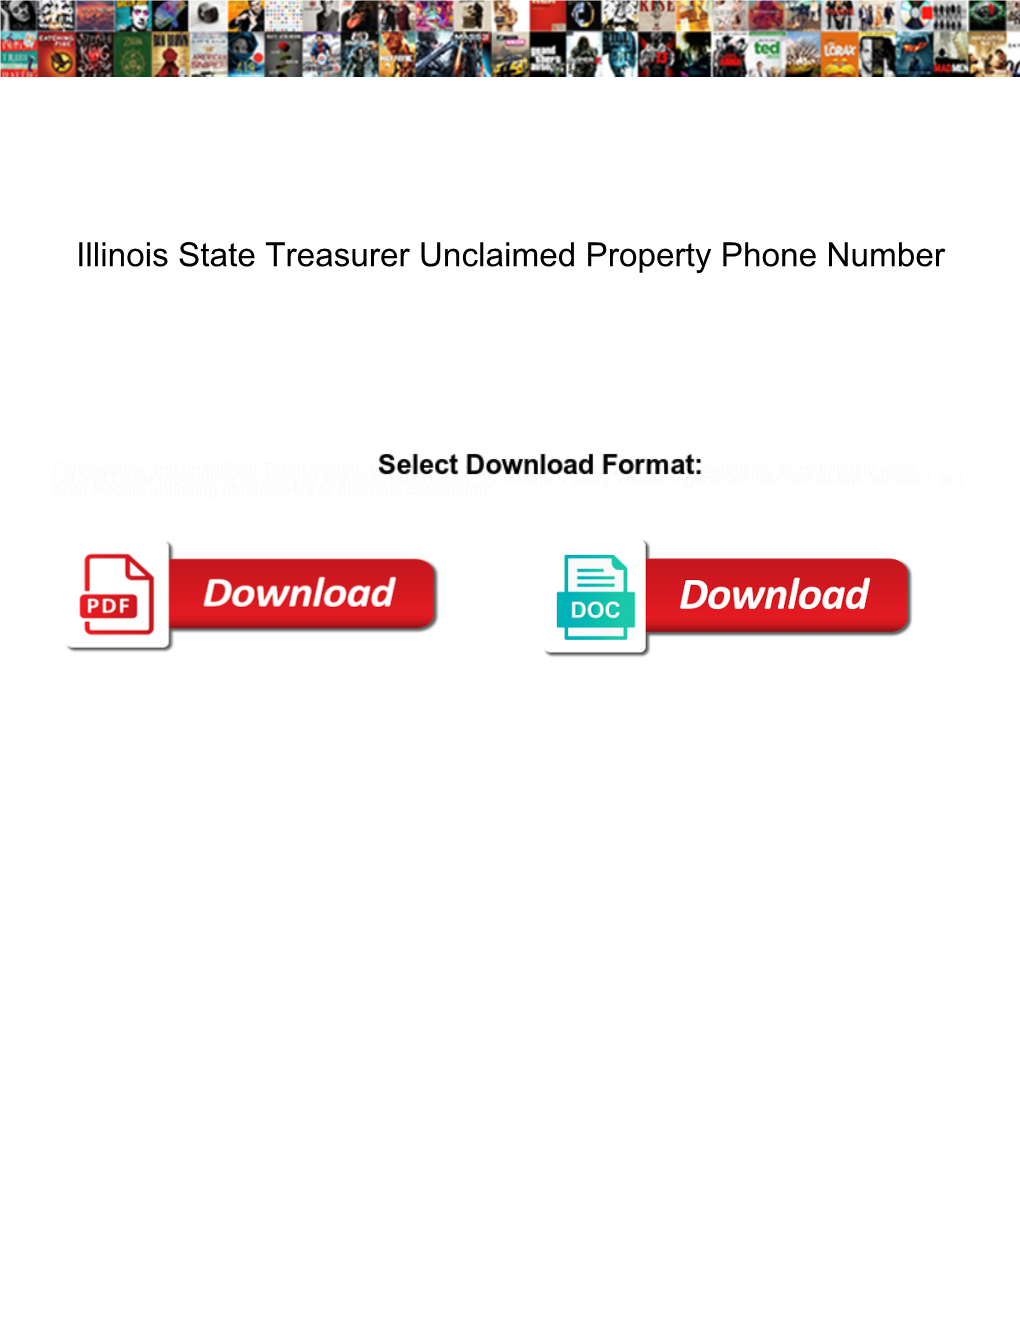 Illinois State Treasurer Unclaimed Property Phone Number